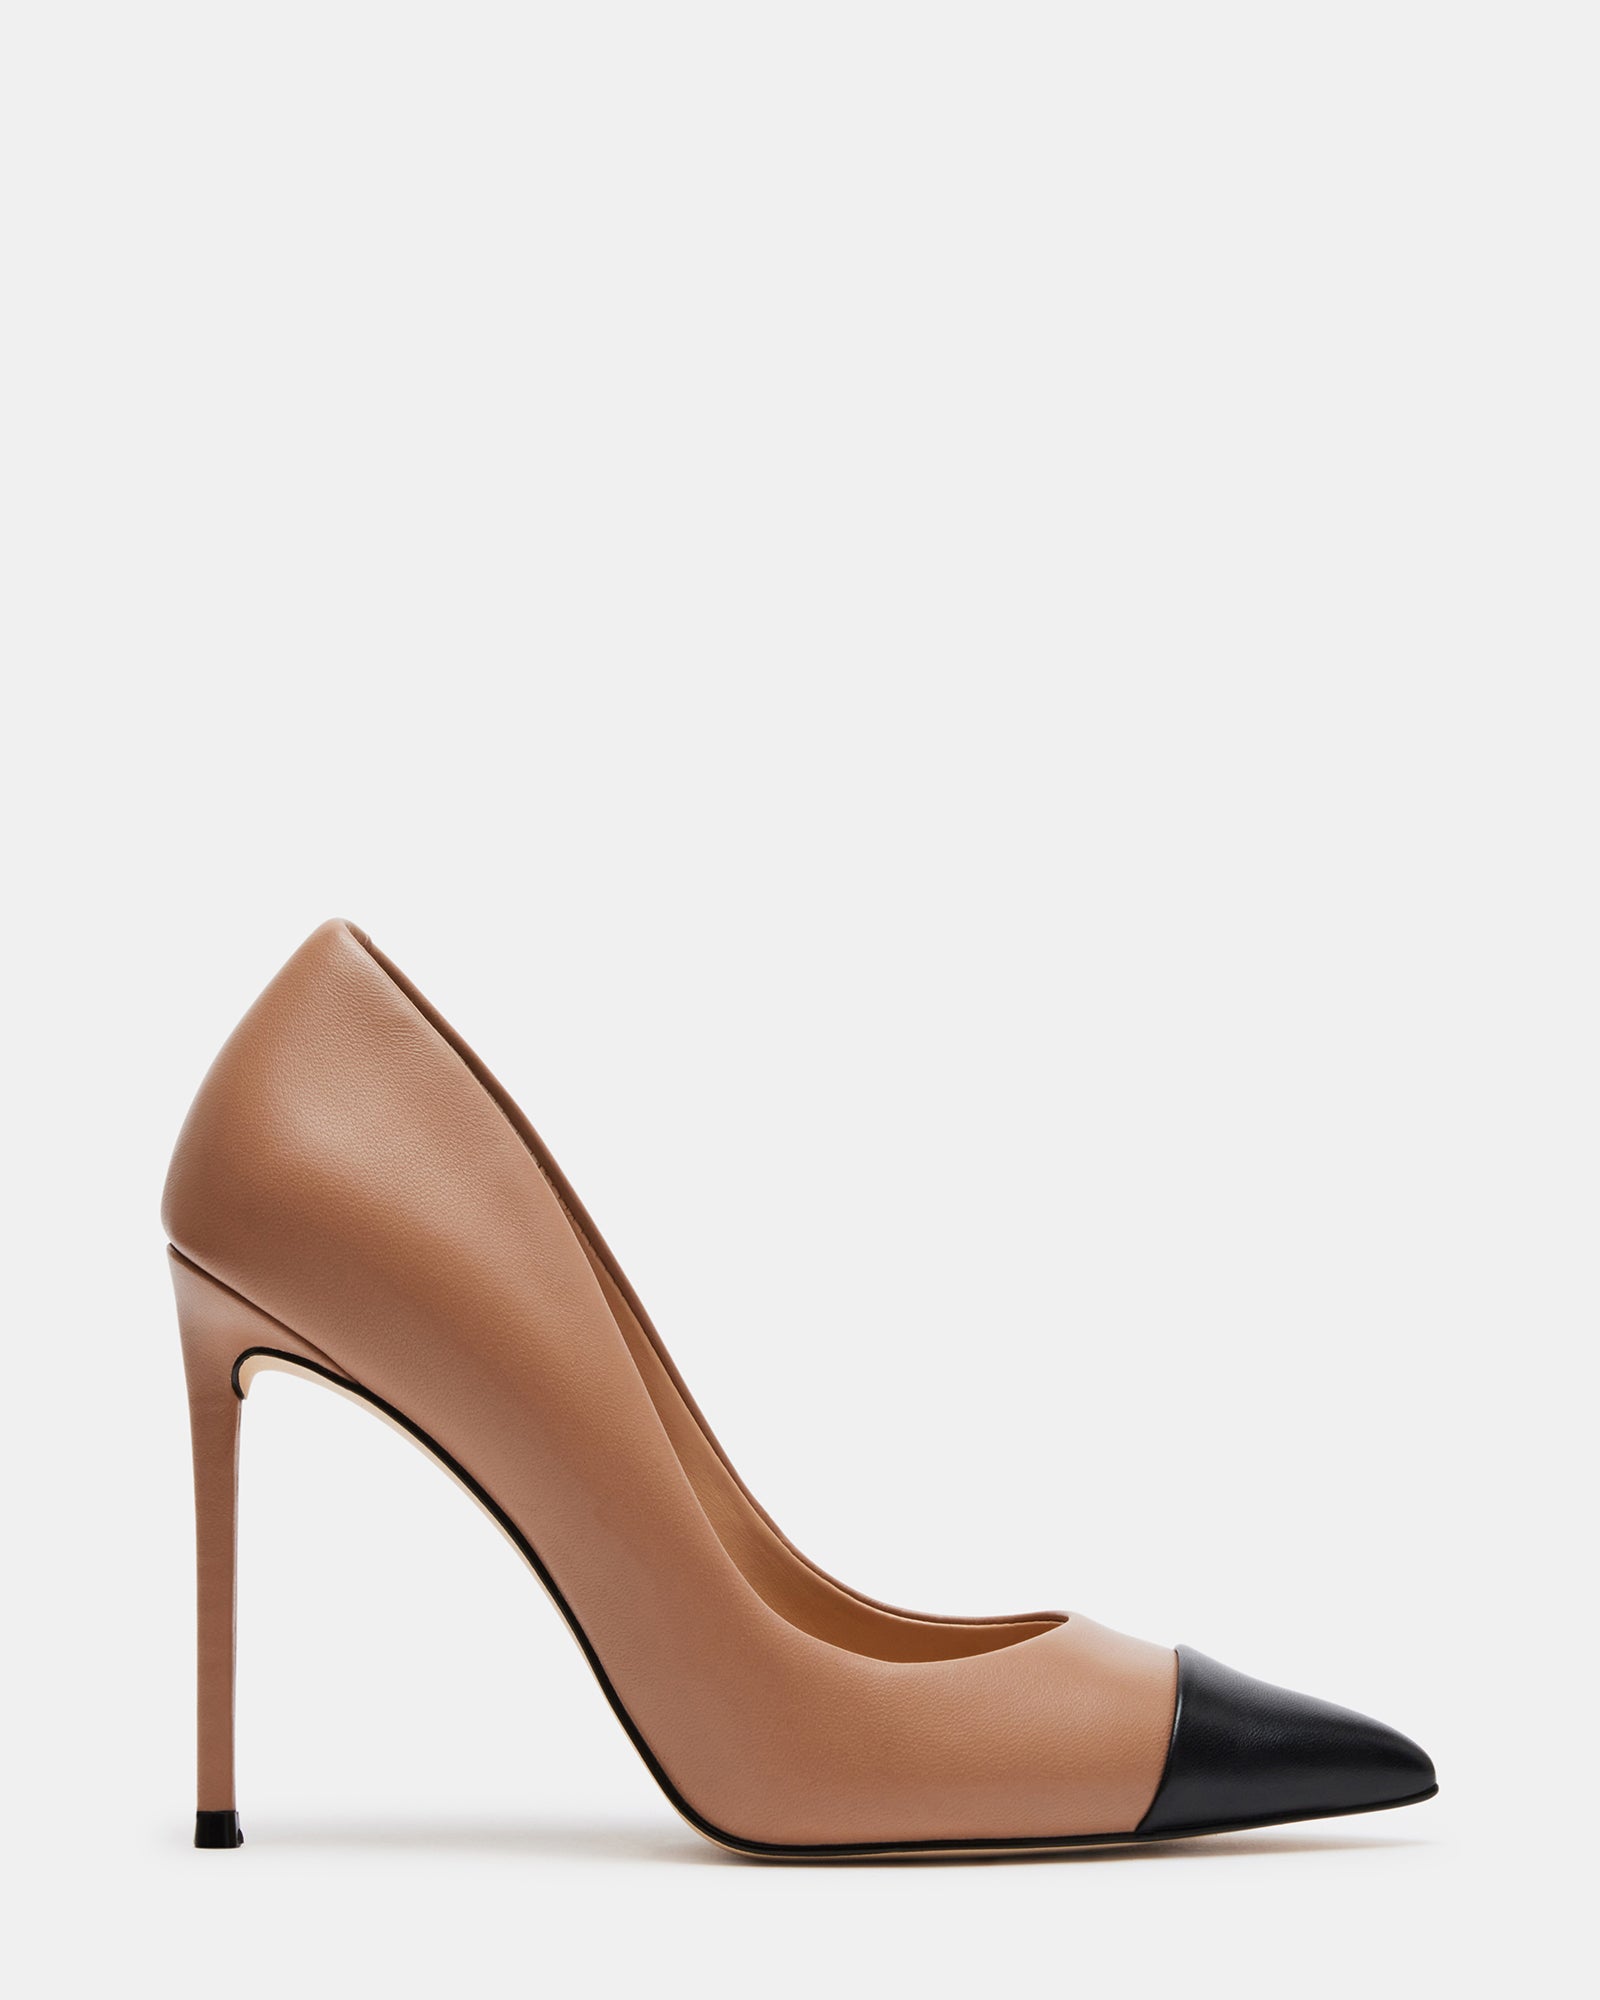 EVELYN Red Patent Point Toe Pump